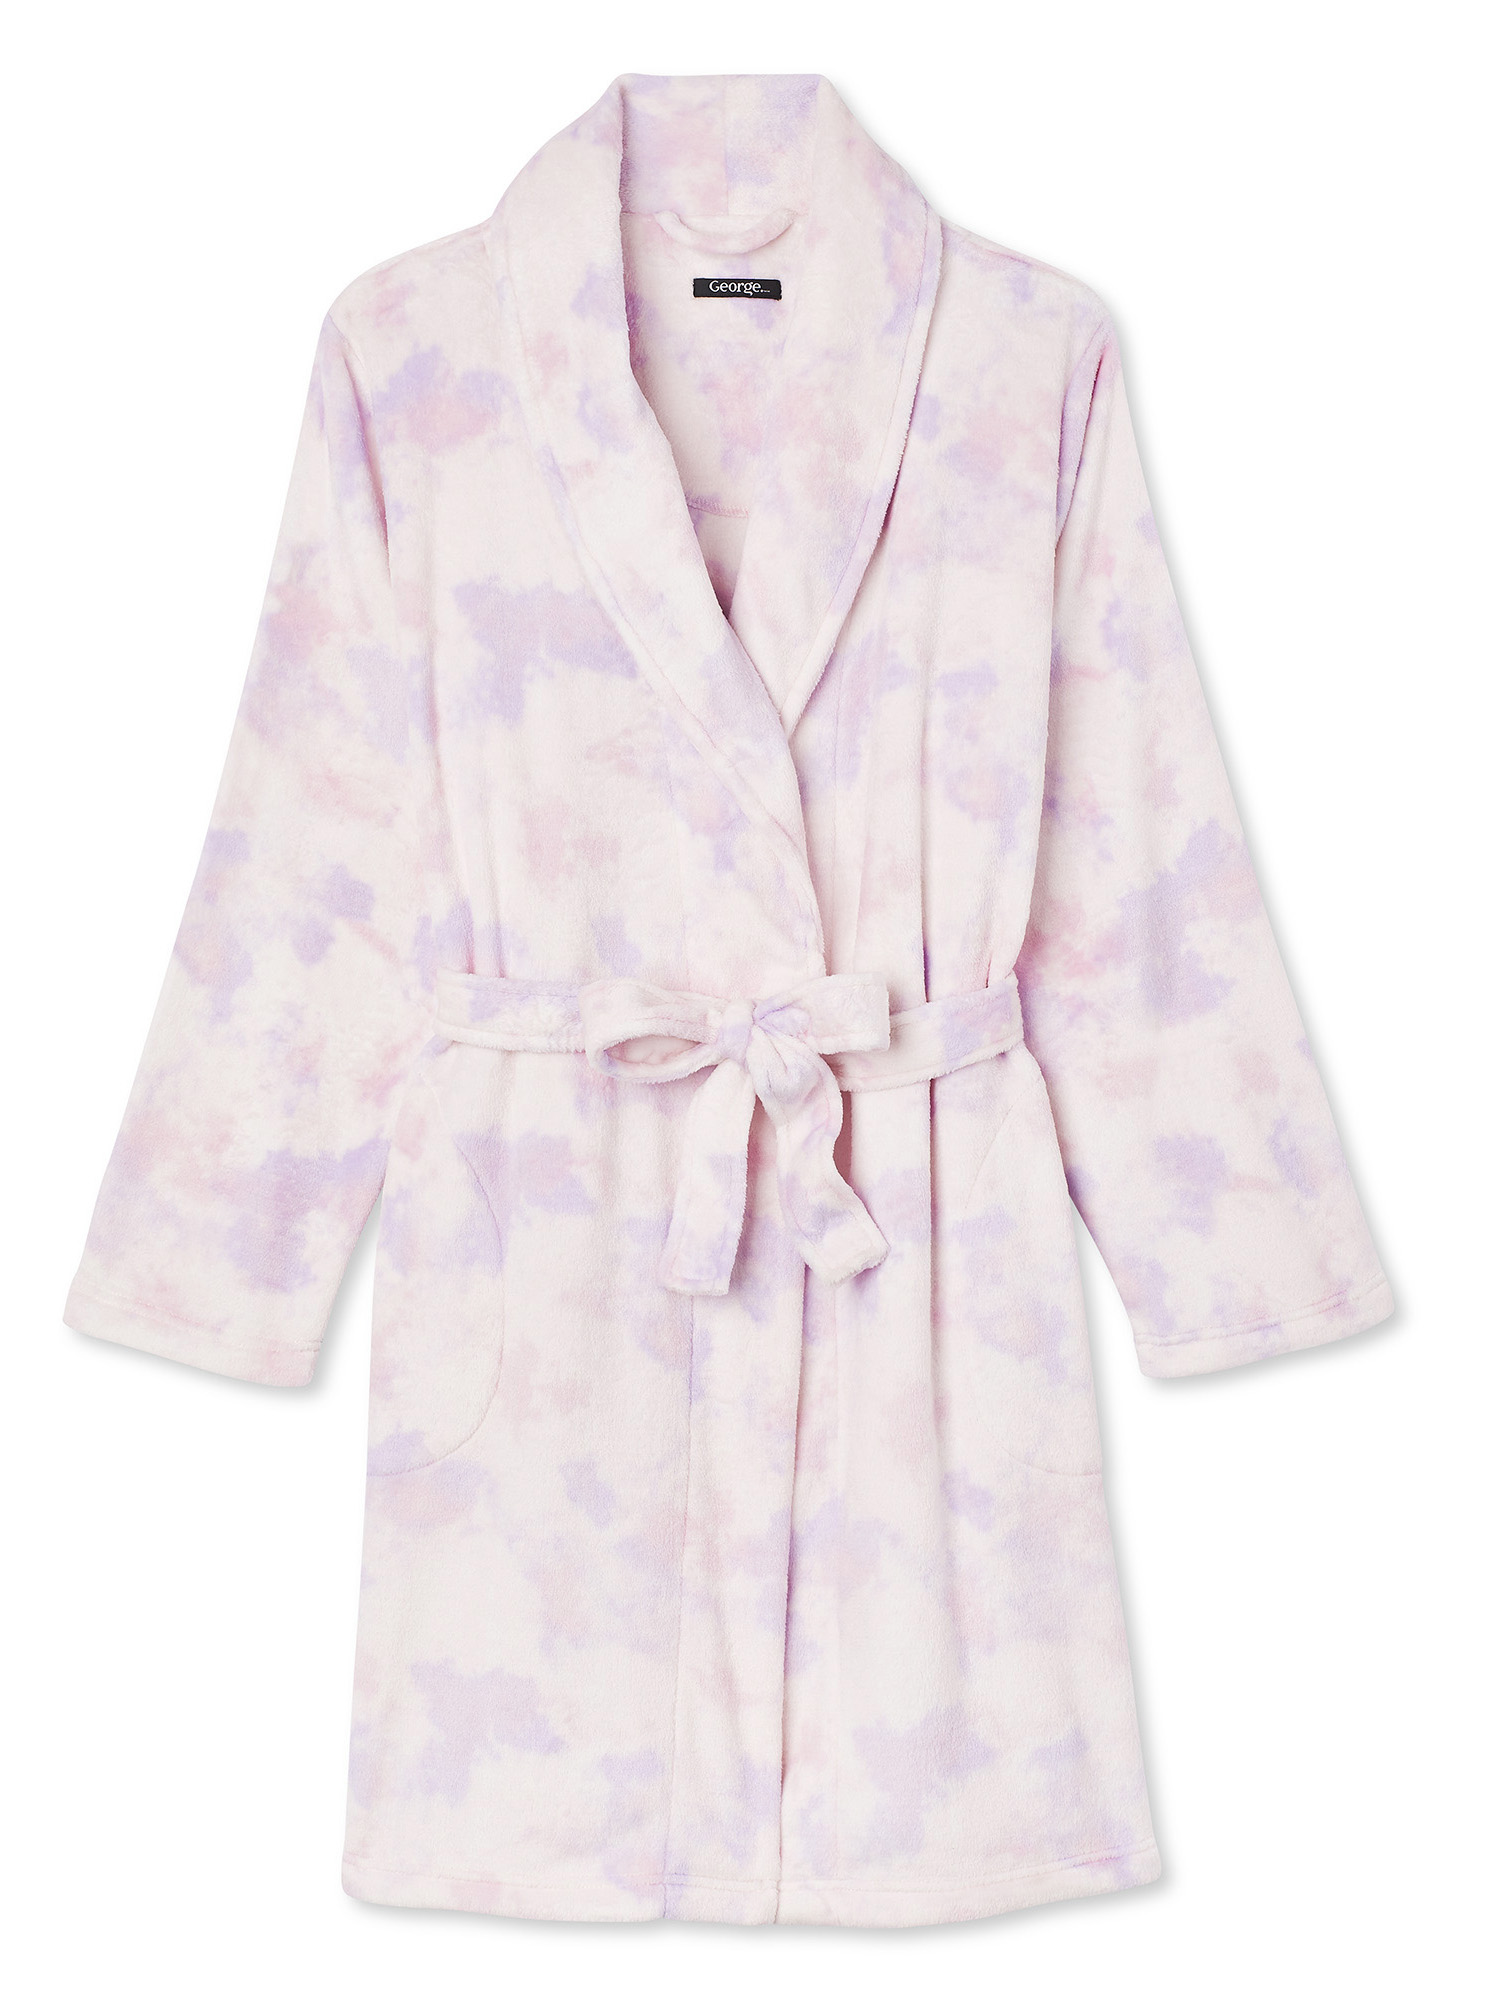 GEORGE Tie Dye Afternoon Polyester Robe (Women's or Women's Plus) 1 Pack - image 7 of 7